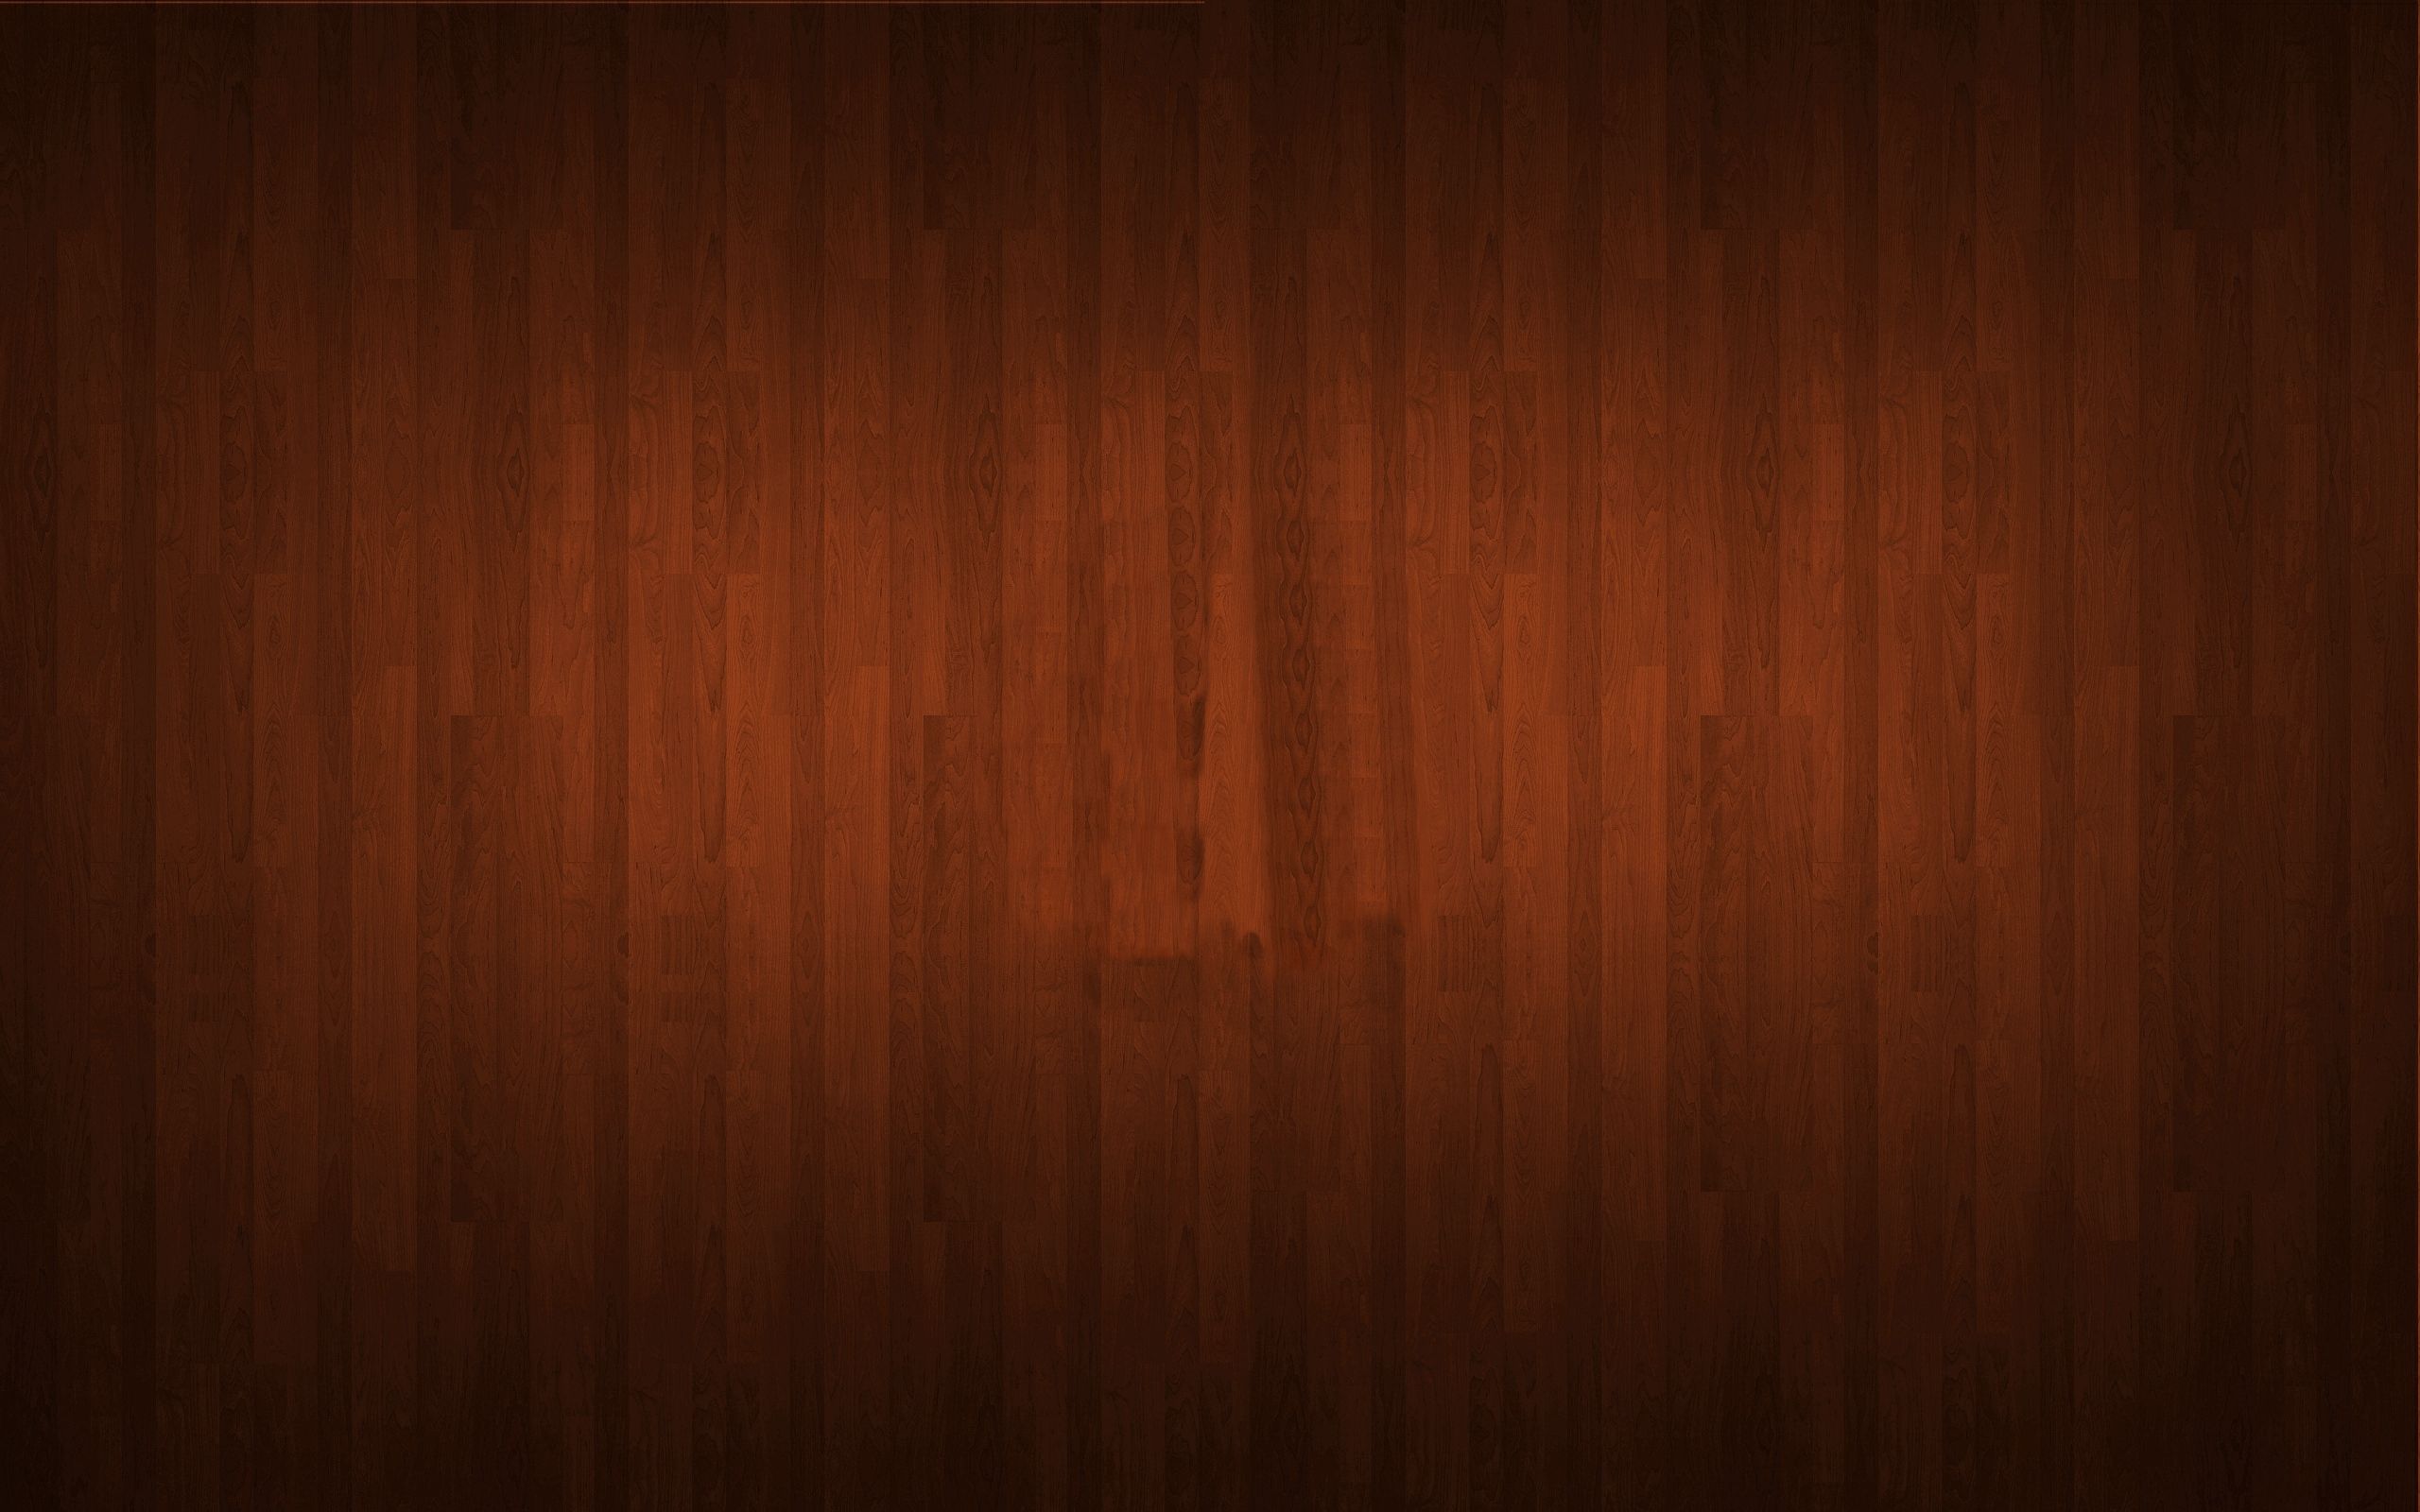 118720 download wallpaper solid, dark, wood, wooden, texture, textures, brown screensavers and pictures for free